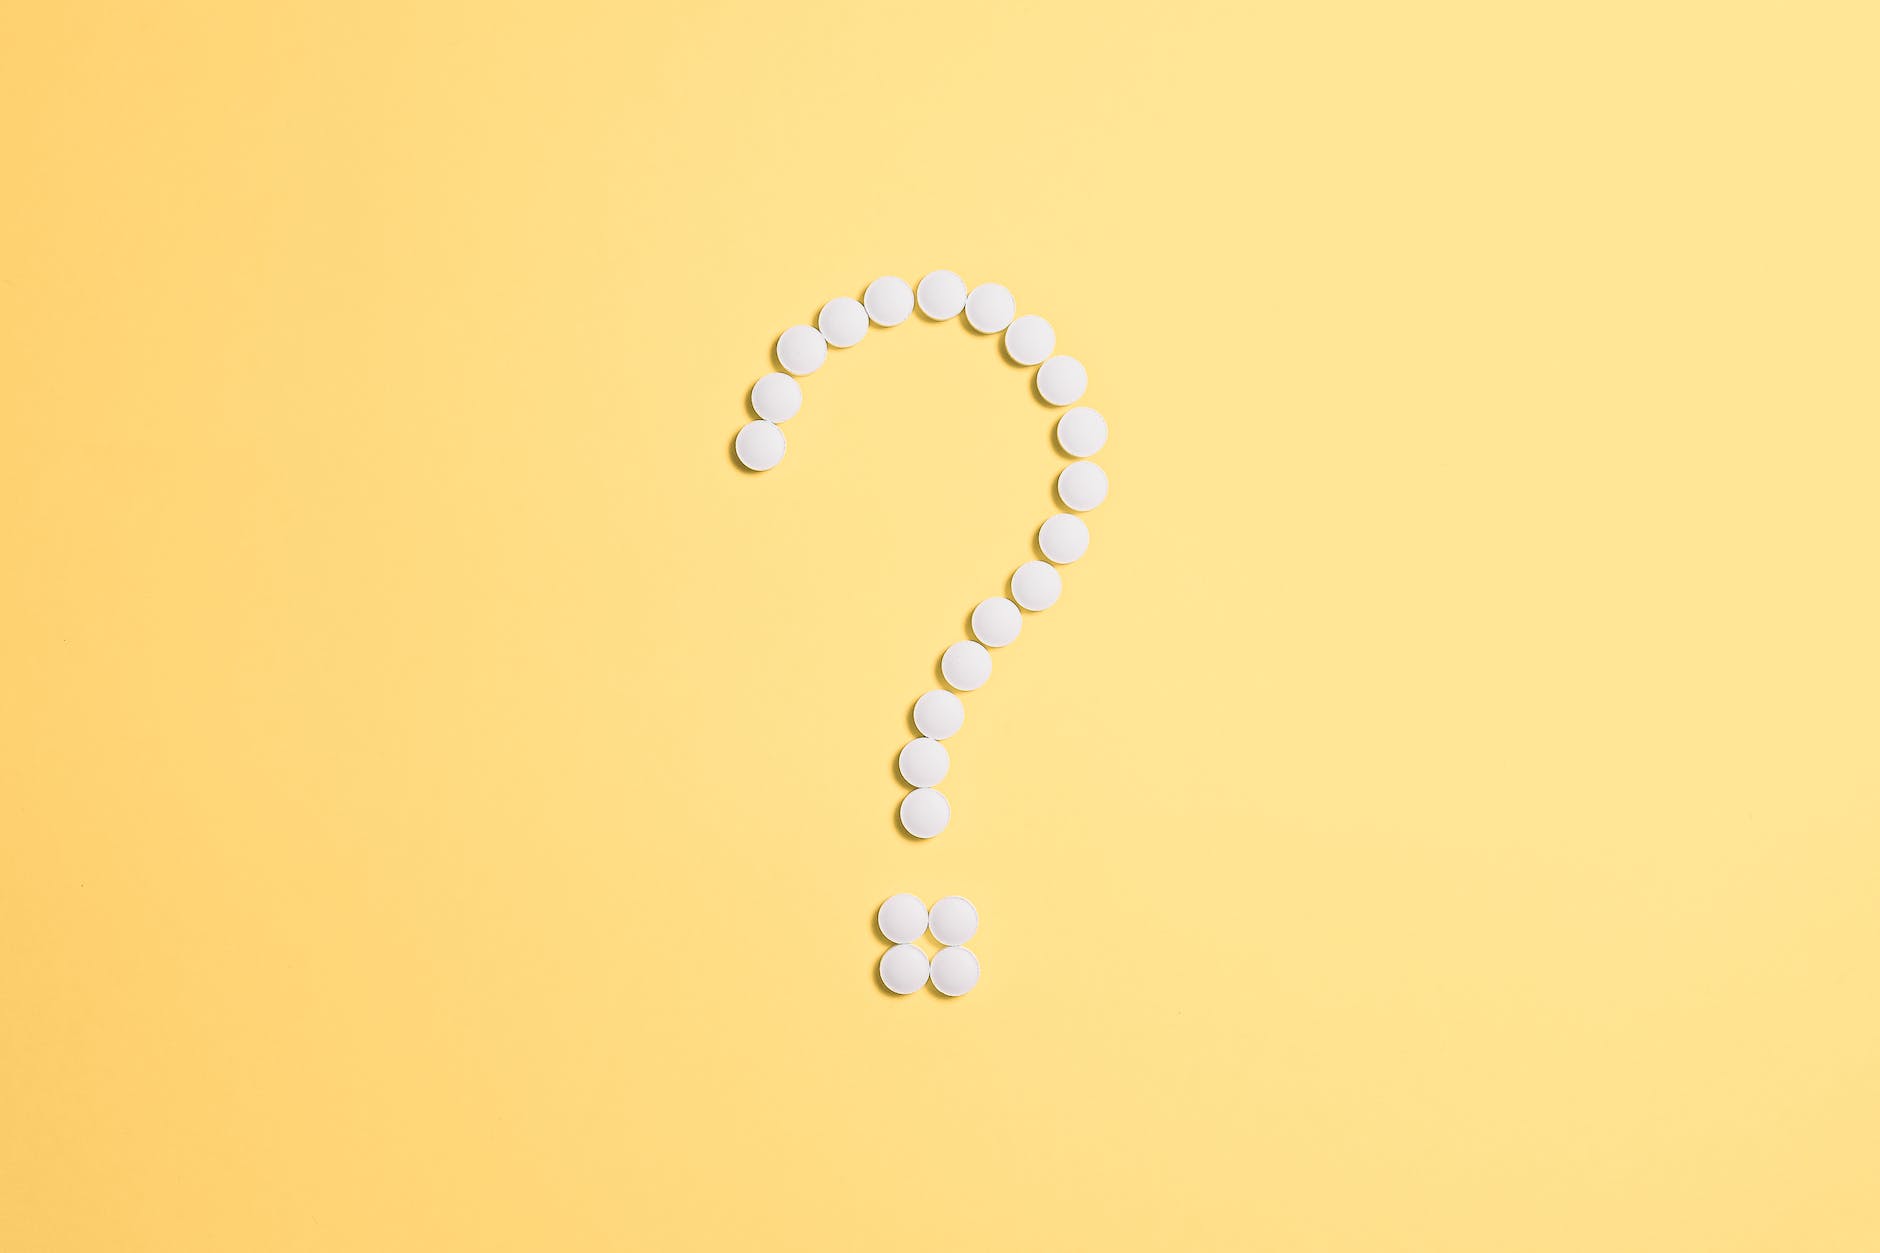 pills fixed as question mark sign